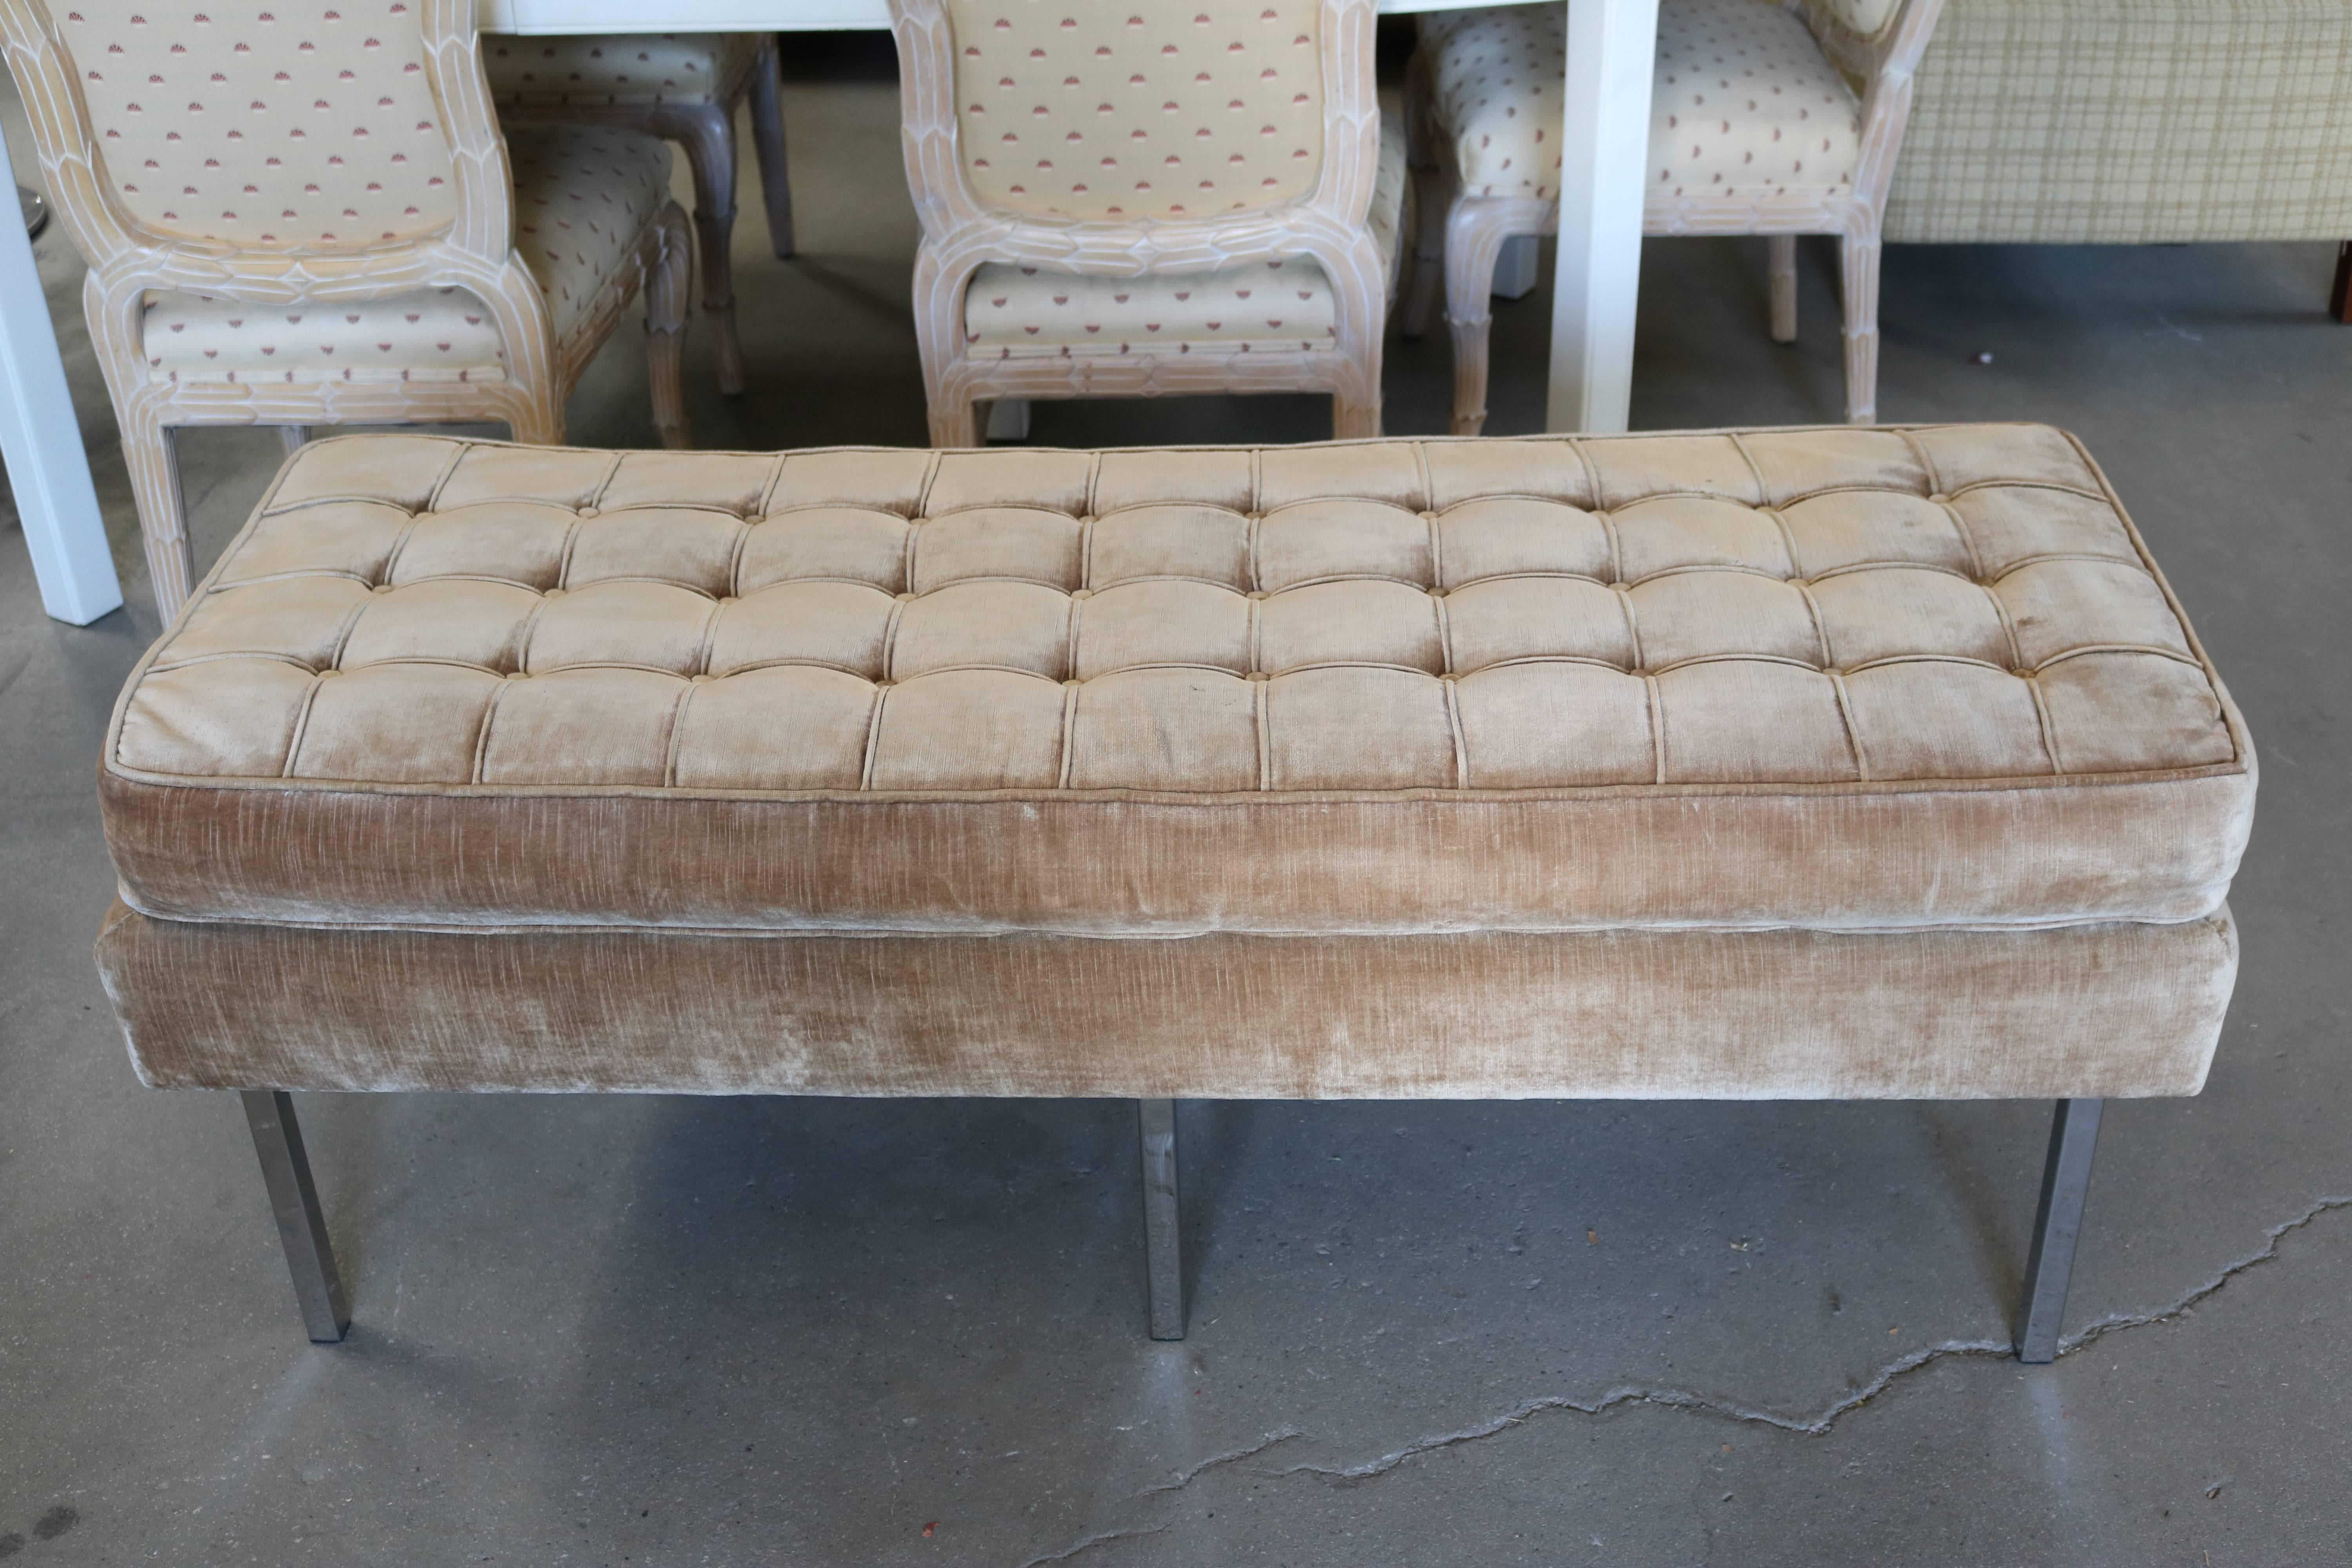 Bench seat with chrome legs and sand colored velvet chenille upholstery. Tufted cushion is fully removable.